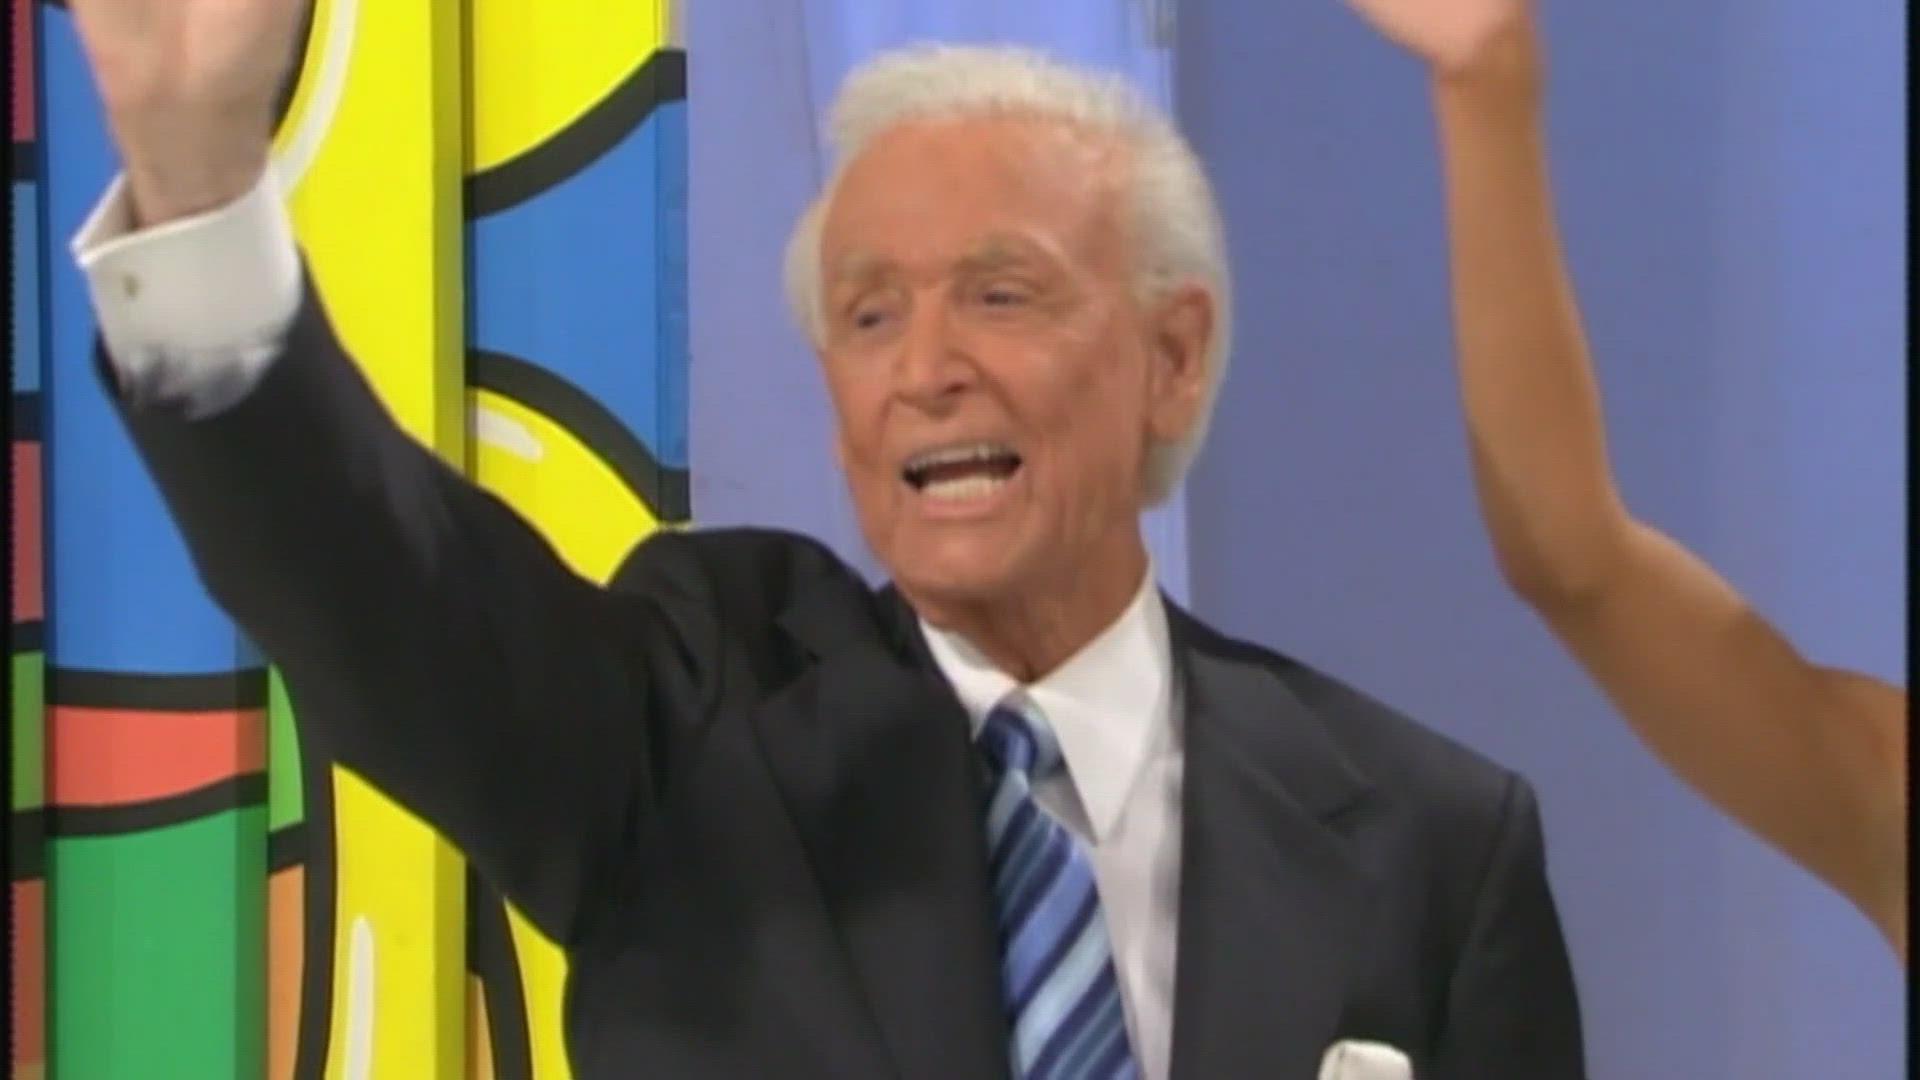 Bob Barker hosted the "Price is Right" for more than three decades. He helped the show become the longest-running game show in television history.